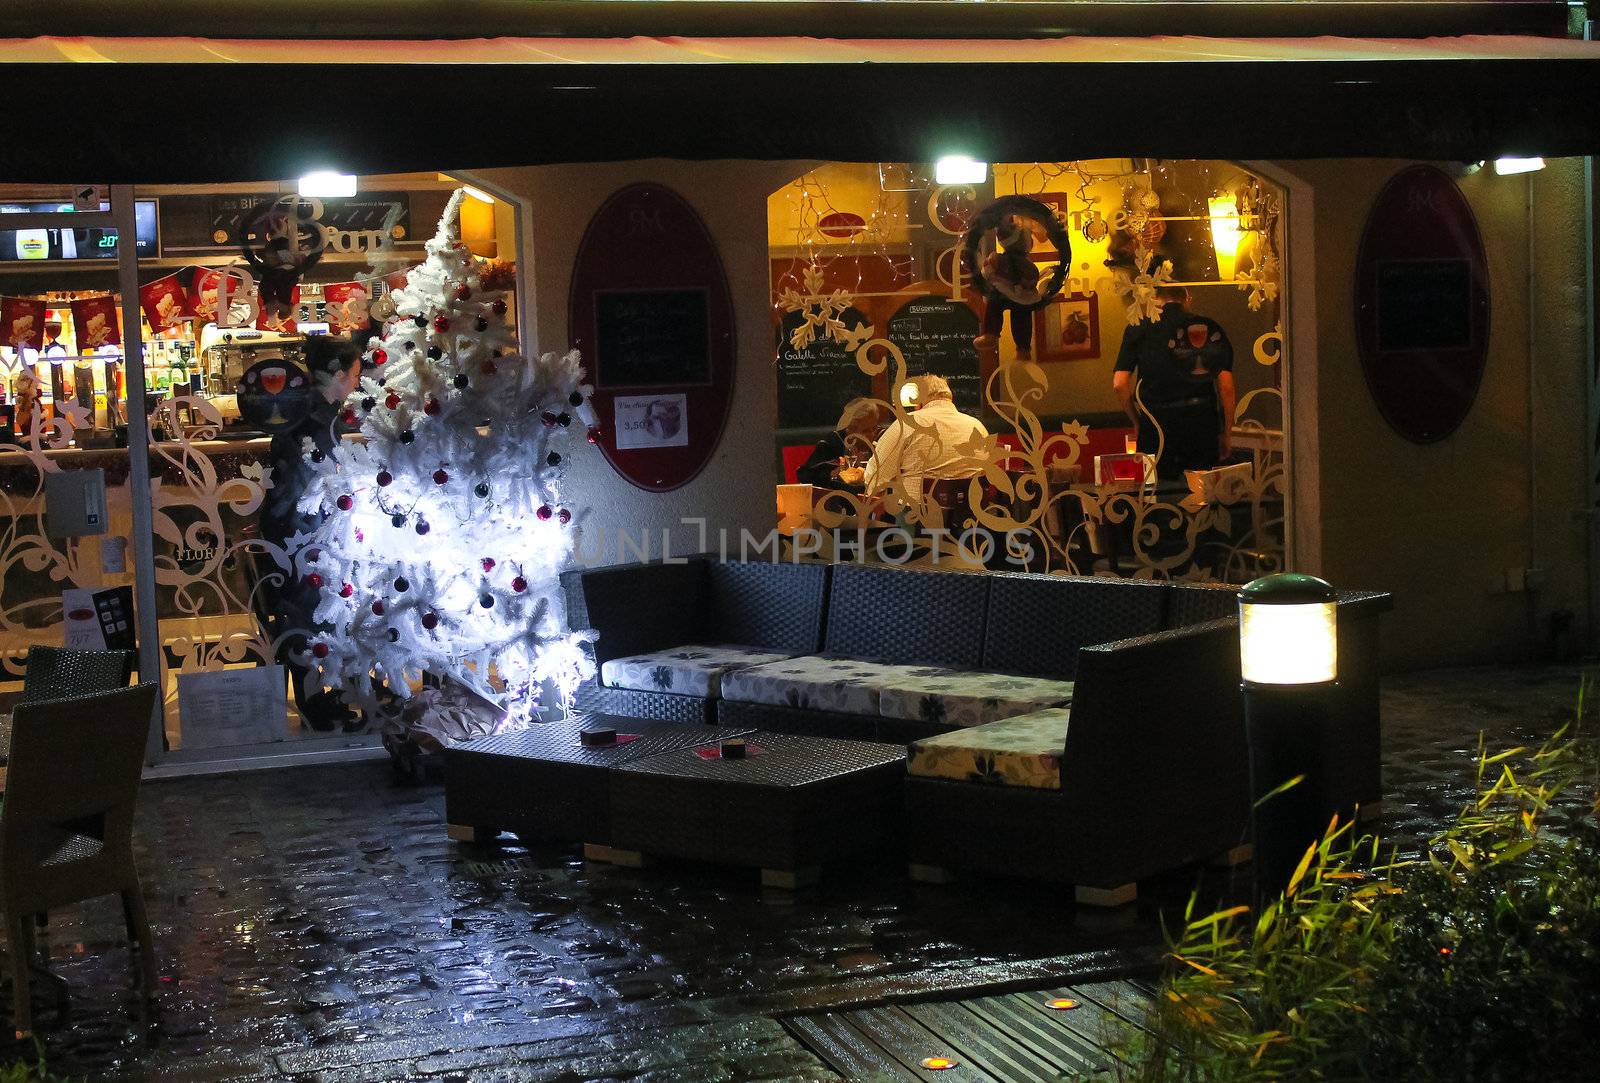 Night Cafe. Christmas in Bayeux. Normandy, France by NickNick